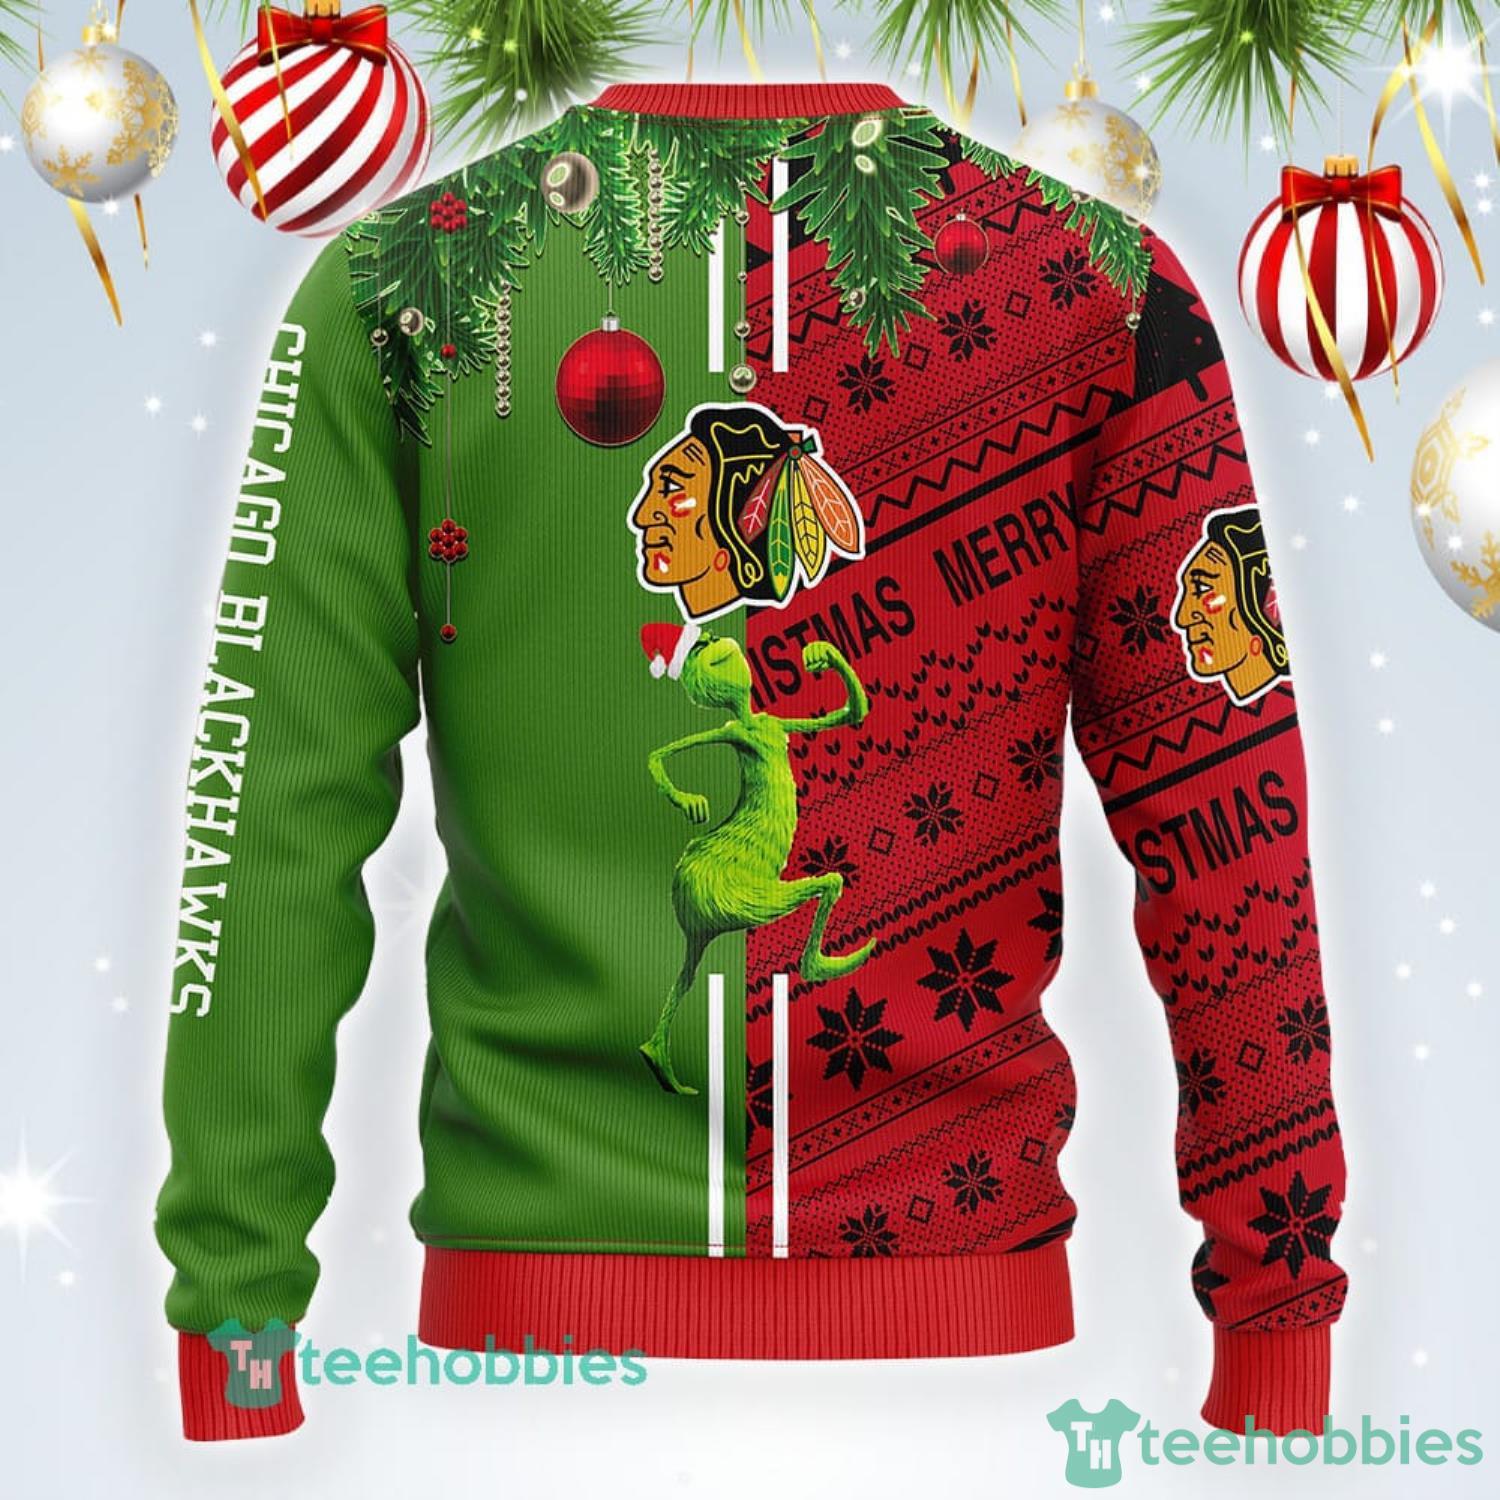 Chicago Blackhawks Iconic Pullover Hoodie - Supporters Place